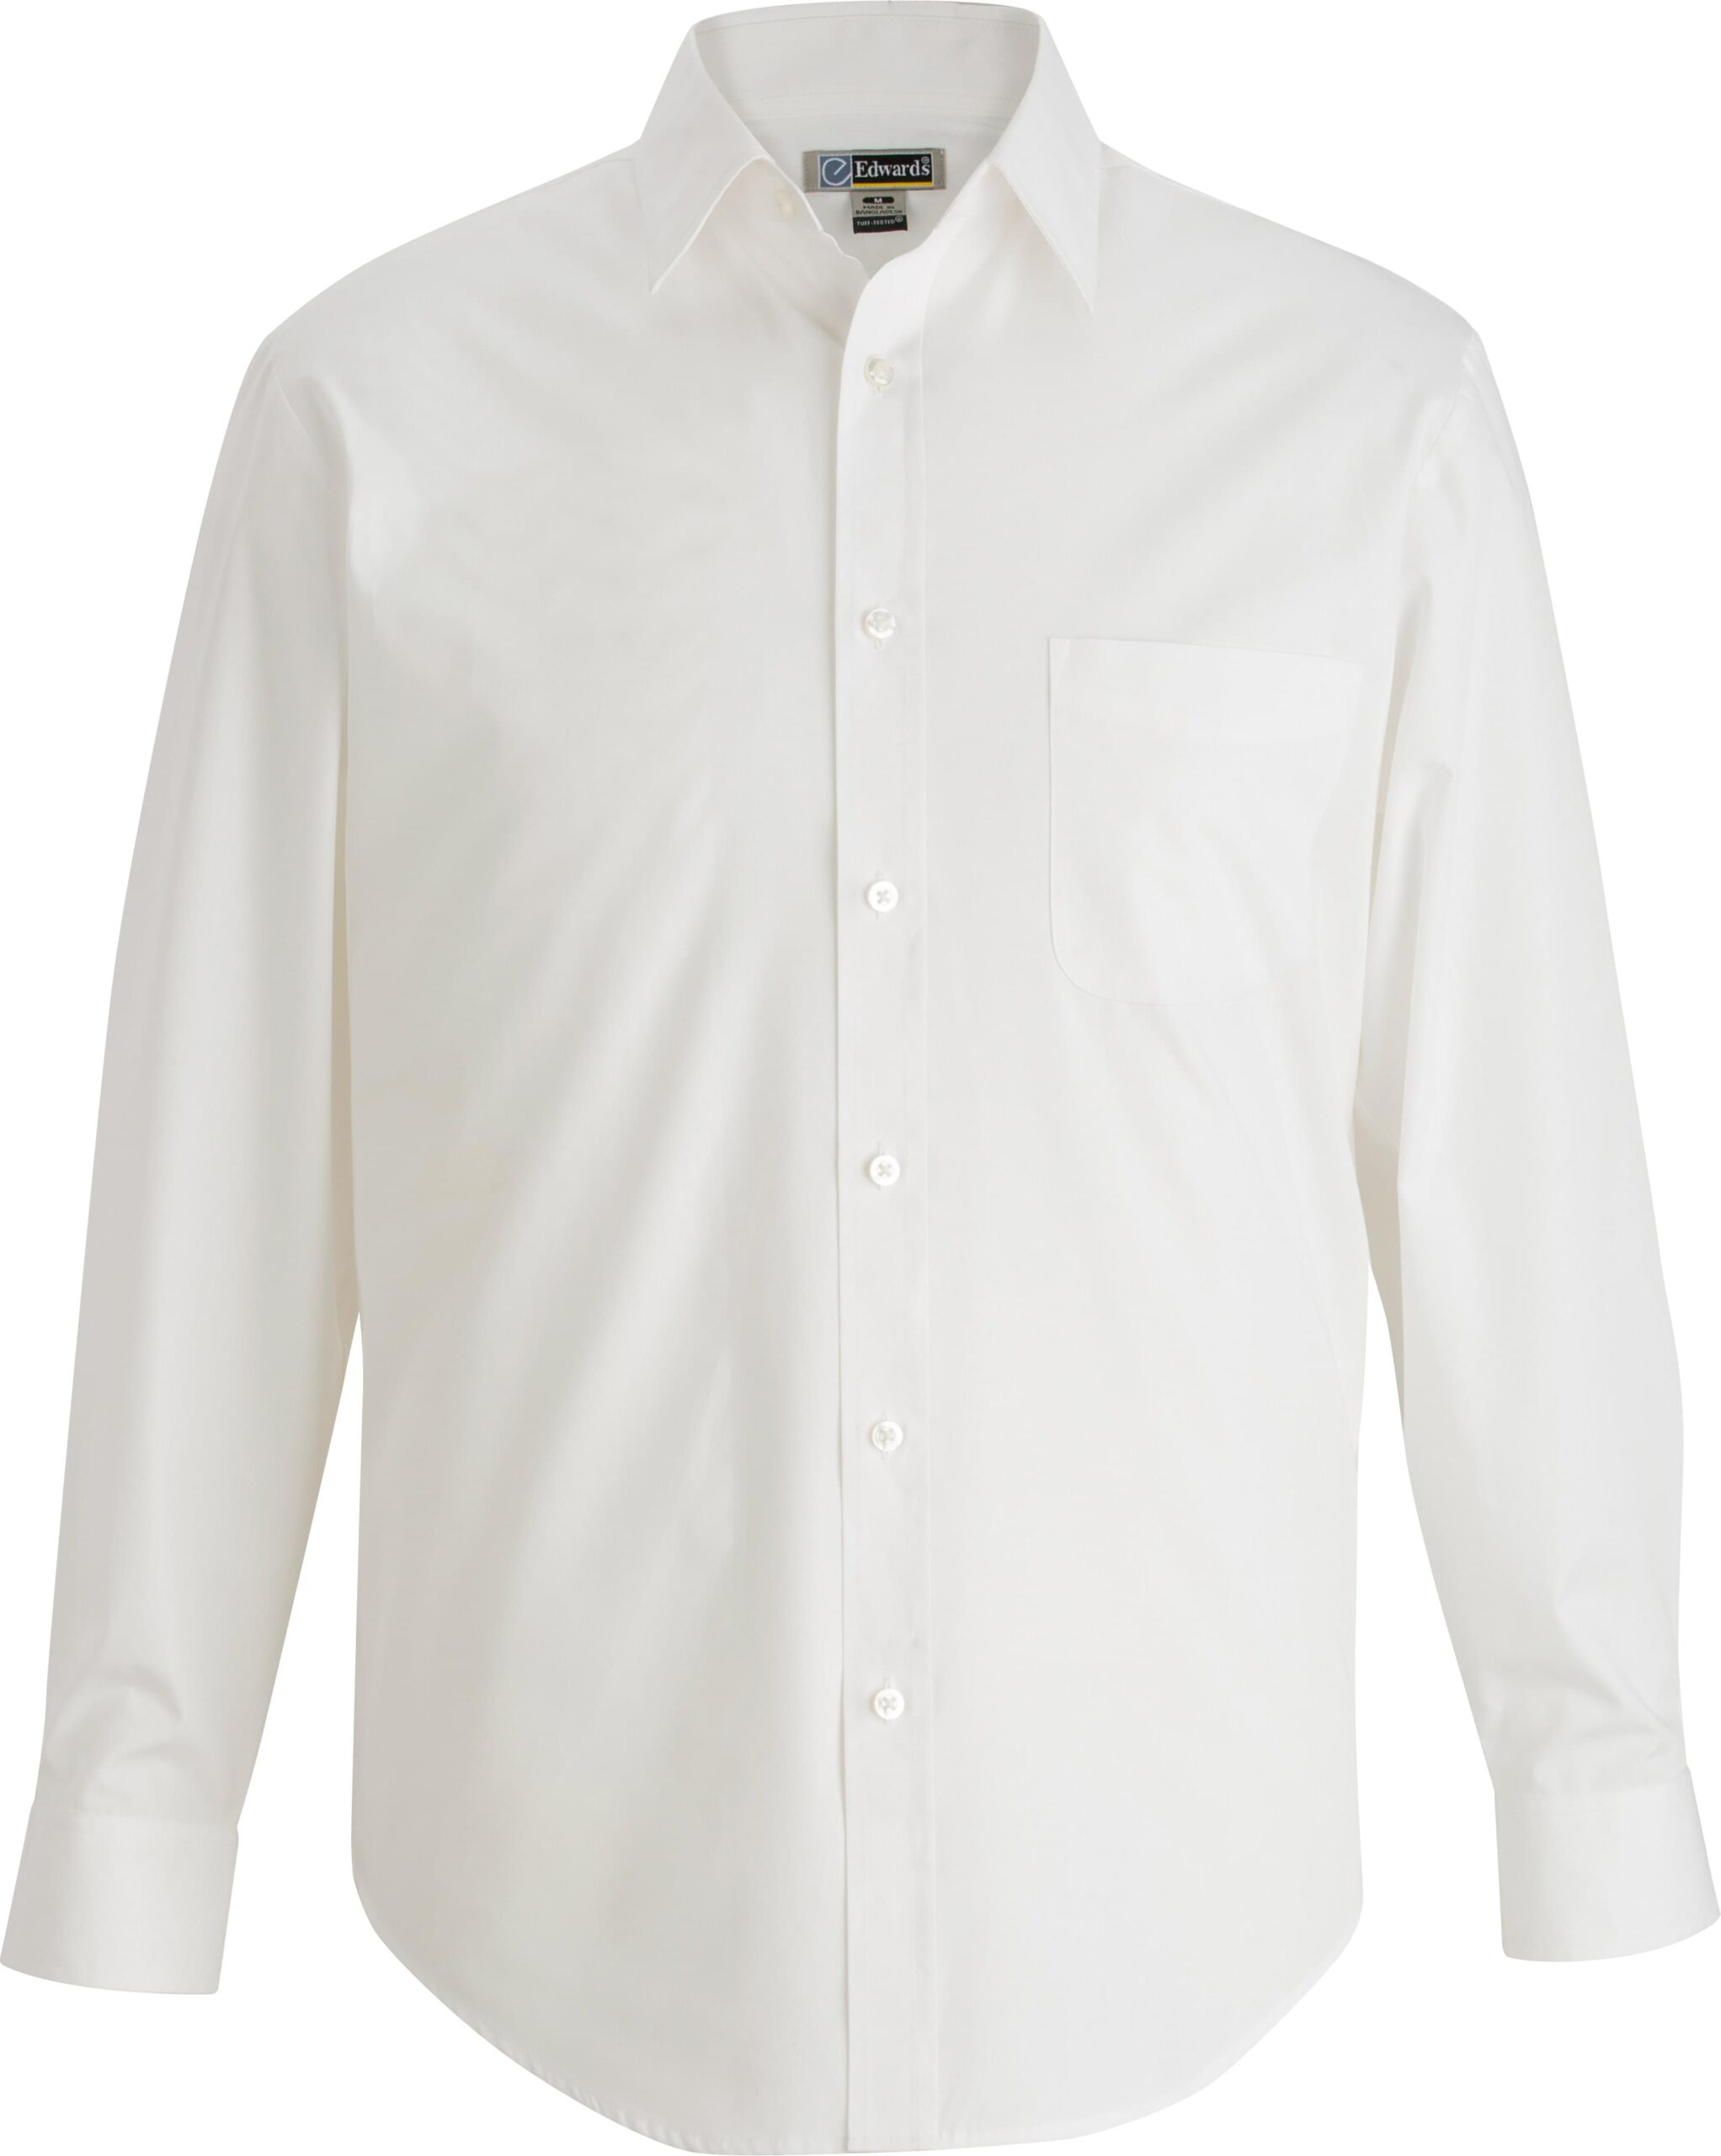 EDWARDS MENS ESSENTIAL BROADCLOTH SHIRT LONG SLEEVE | Uniforms Today